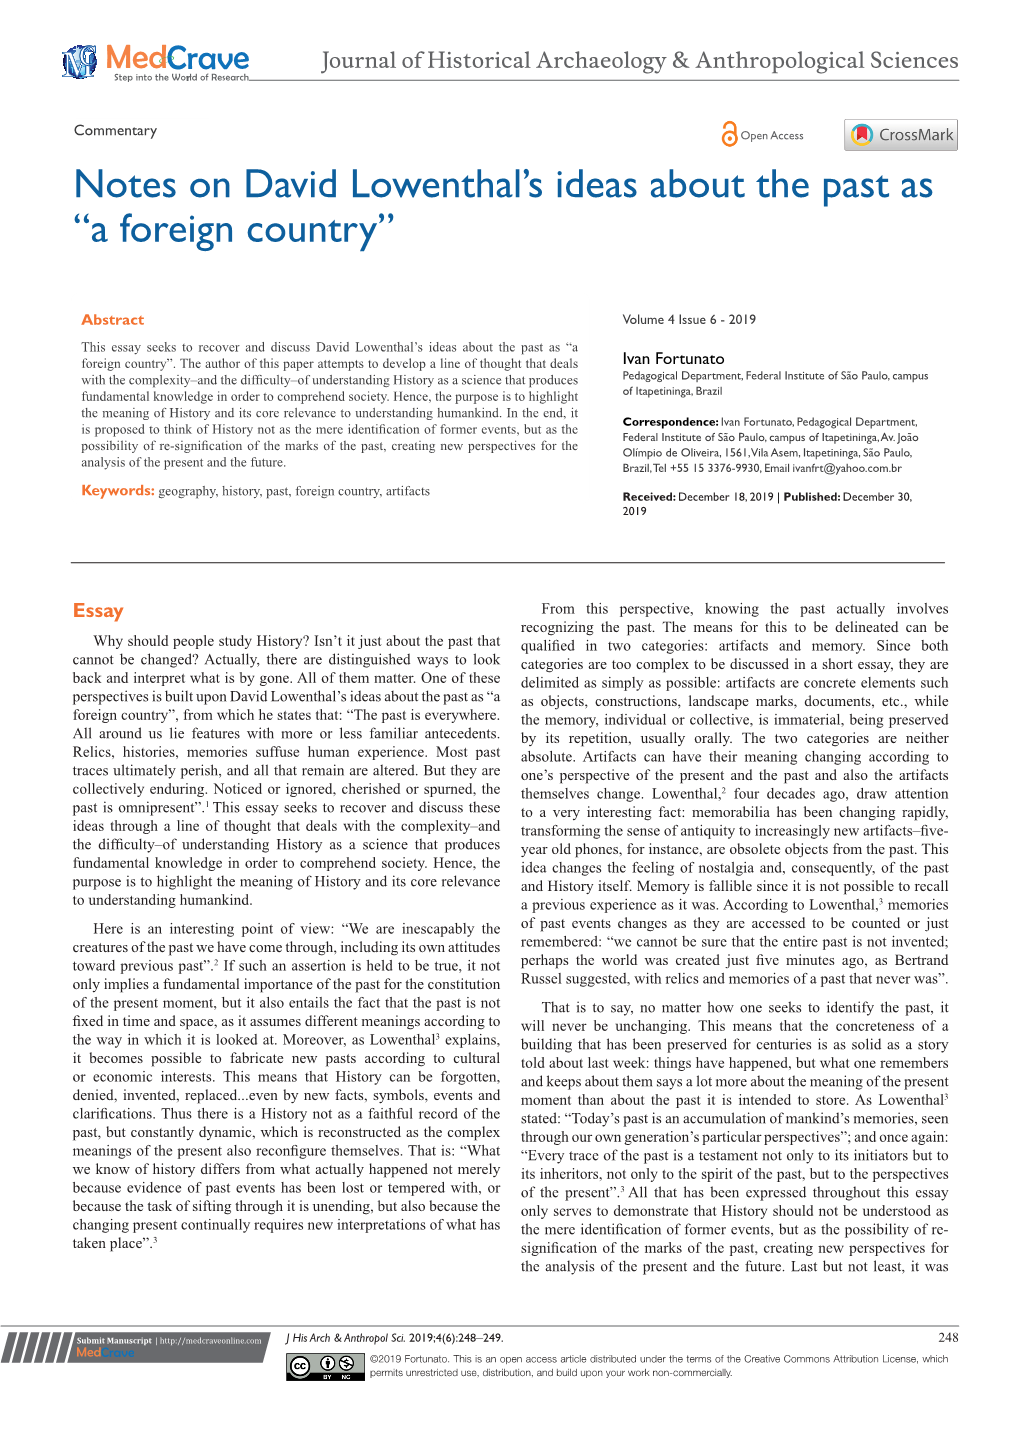 Notes on David Lowenthal's Ideas About the Past As “A Foreign Country”